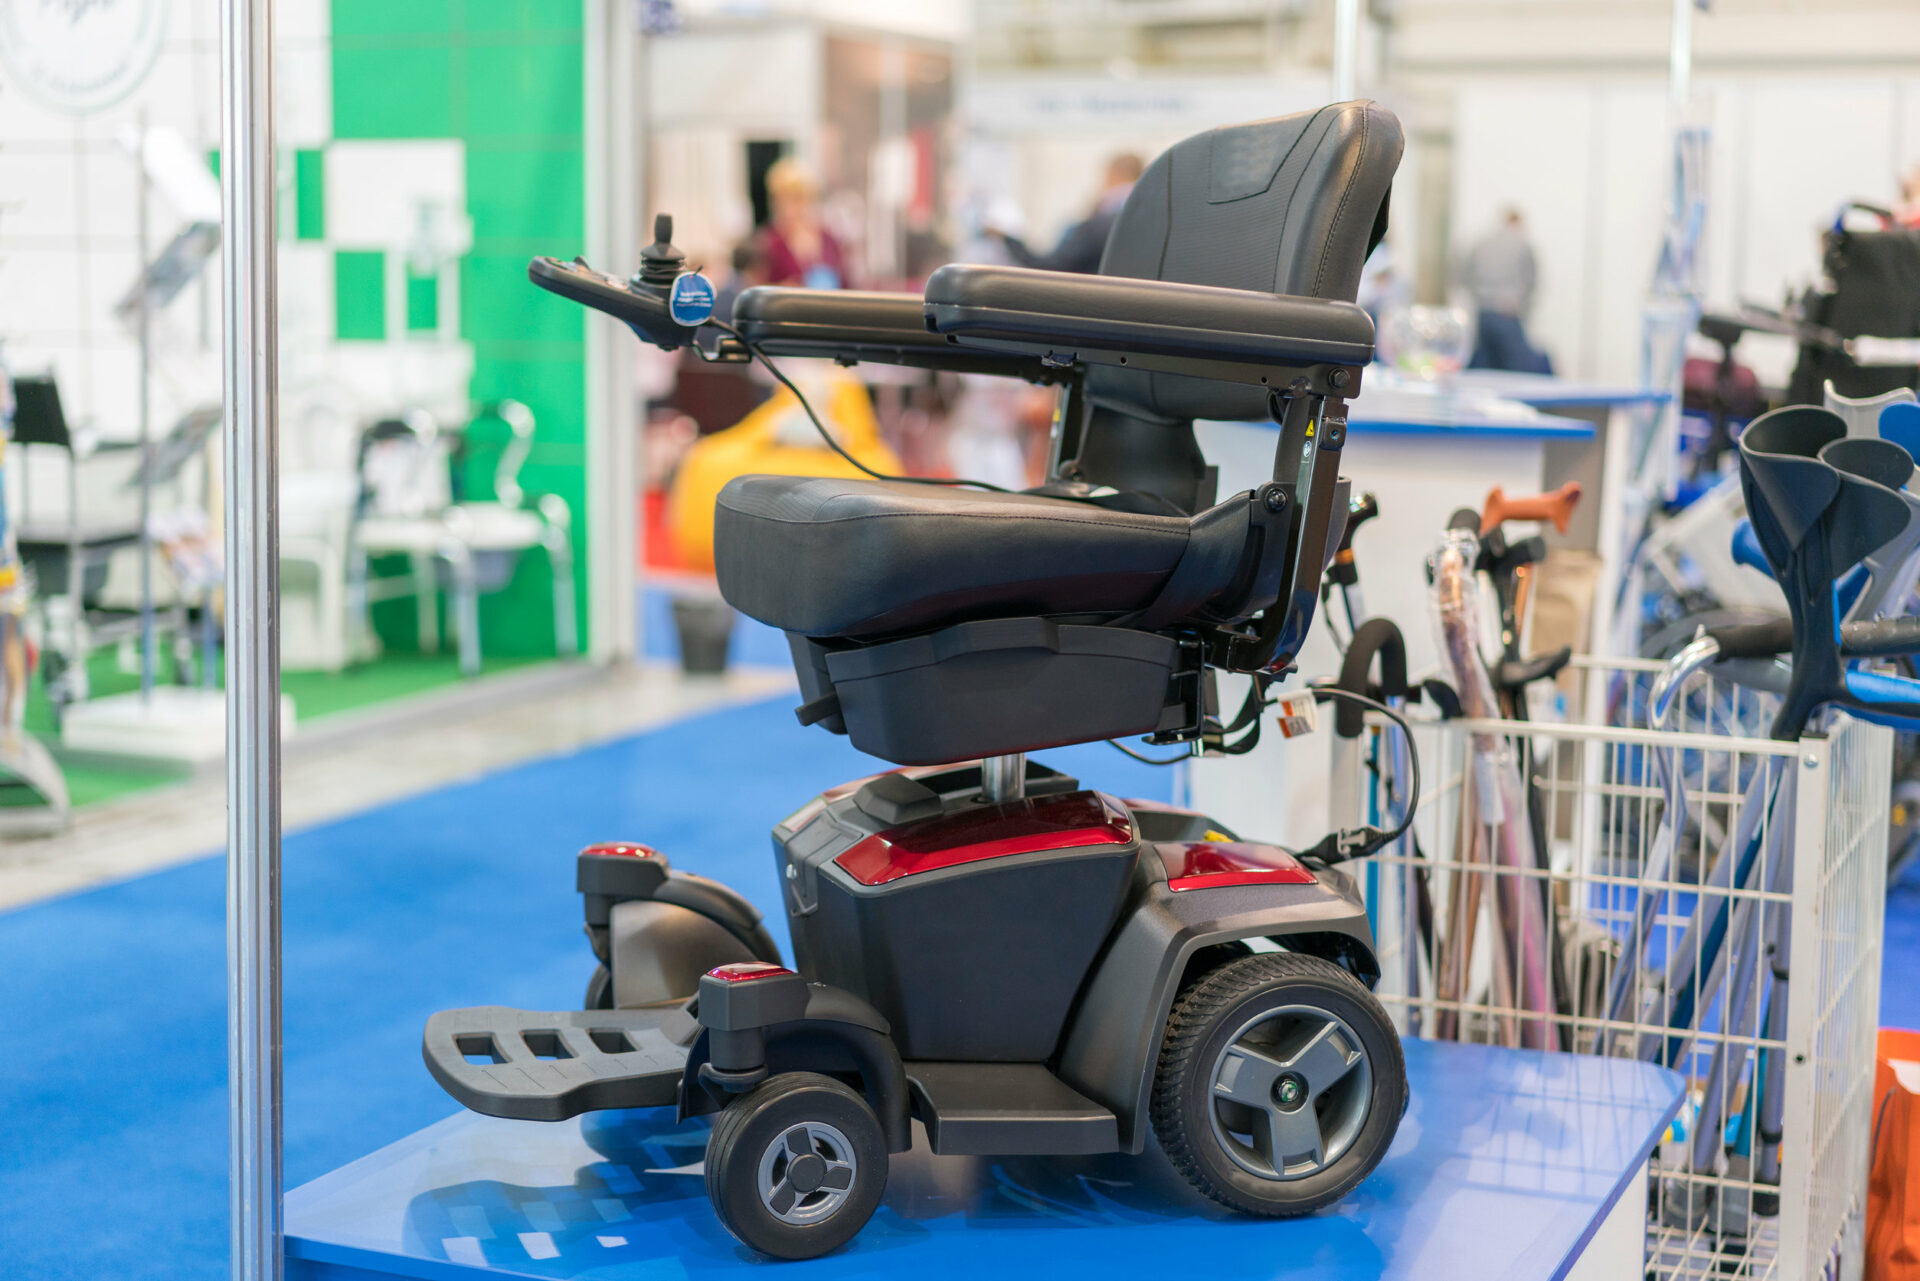 The Technology of Wheelchairs in the Future